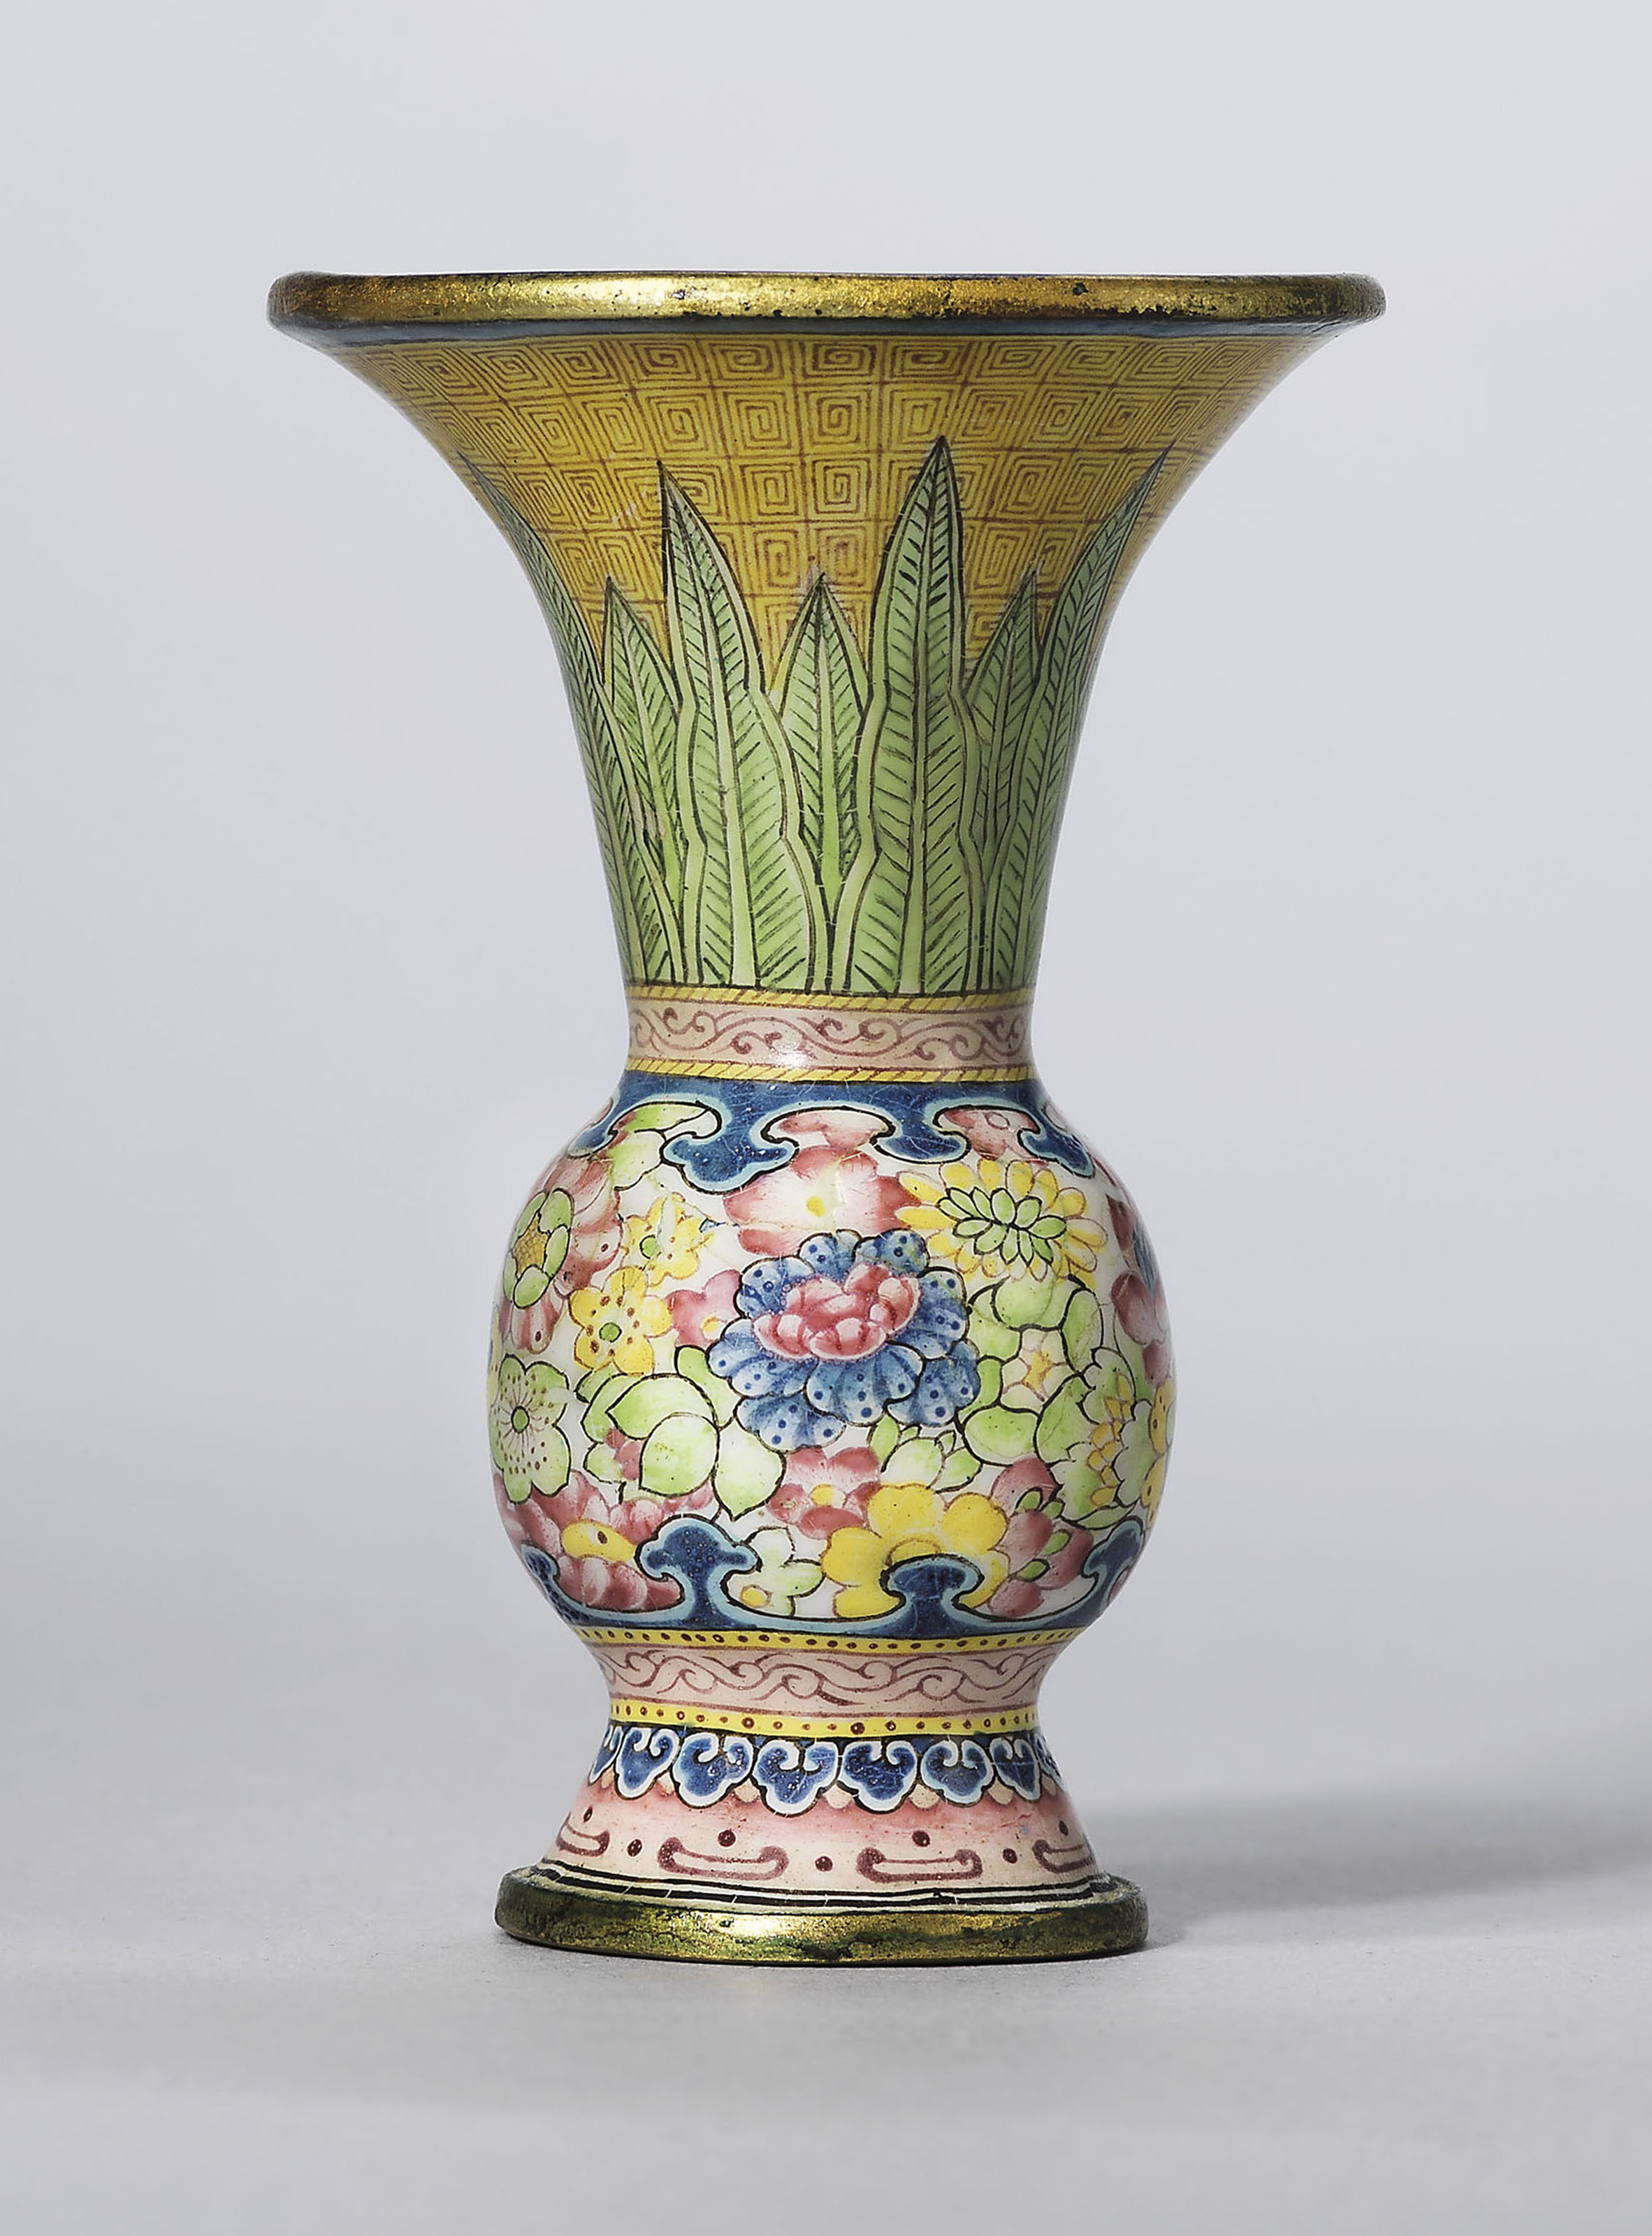 25 Recommended Large White Vases Online 2023 free download large white vases online of a guide to the symbolism of flowers on chinese ceramics christies within a rare painted enamel gu shaped miniature vase qianlong four character mark in